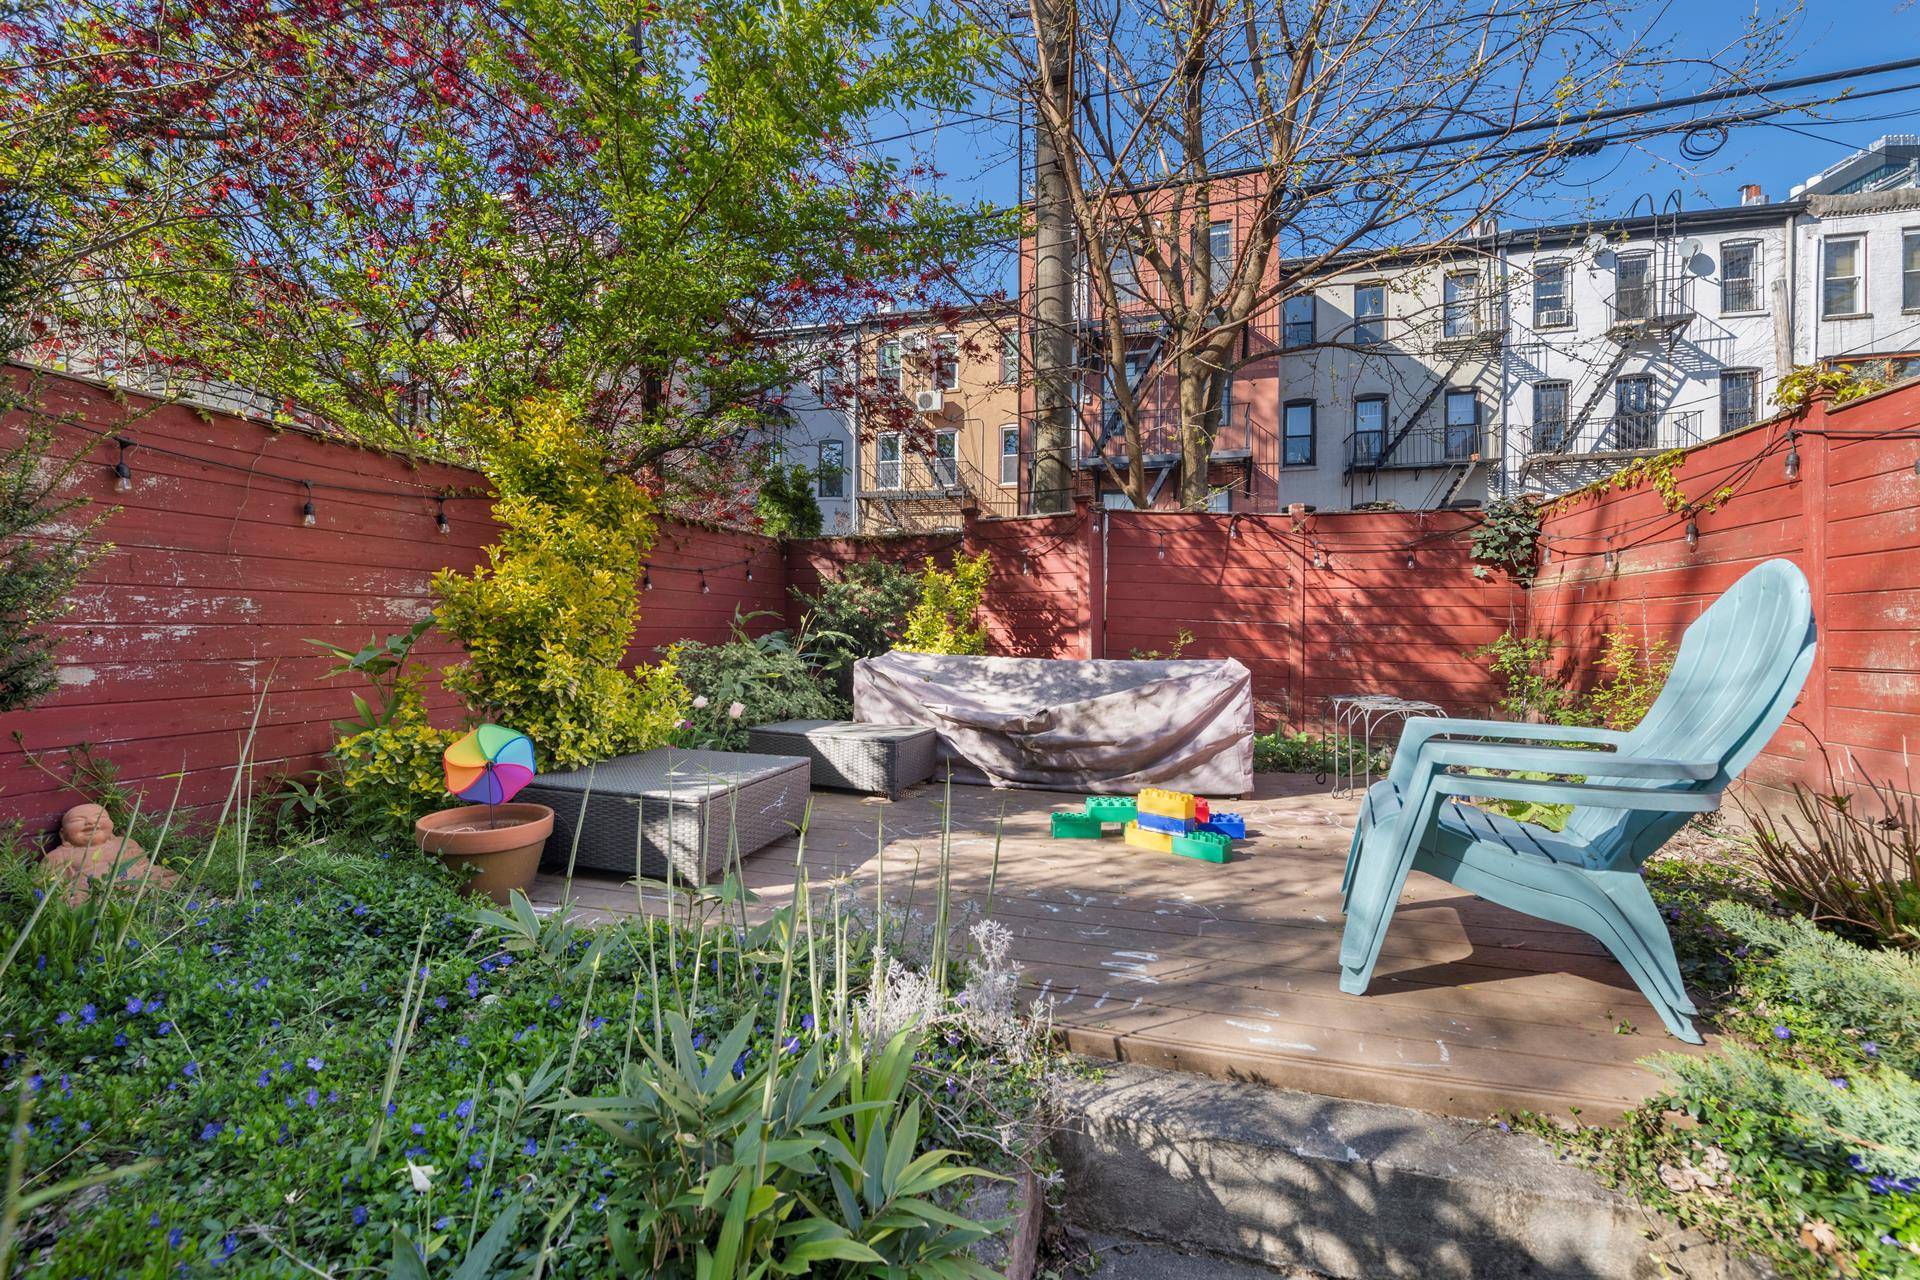 Enter on the first floor of a privately owned, four unit building, and you'll find this duplex Brooklyn home.